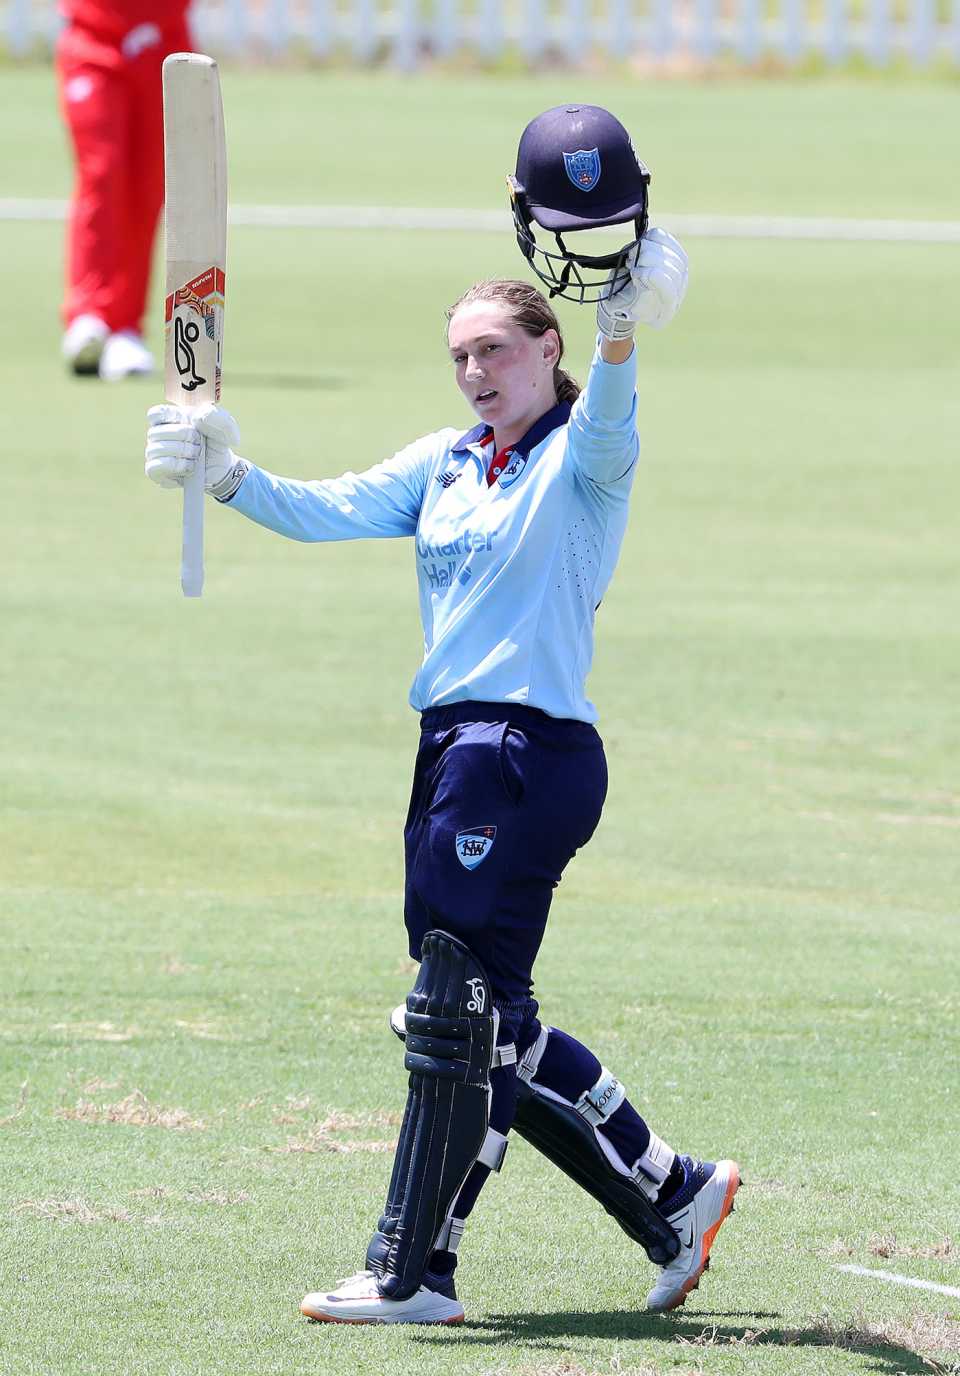 Anika Learoyd's century gave NSW a good total but it wasn't enough, South Australia vs New South Wales, WNCL 2022-23, Adelaide, January 19, 2023